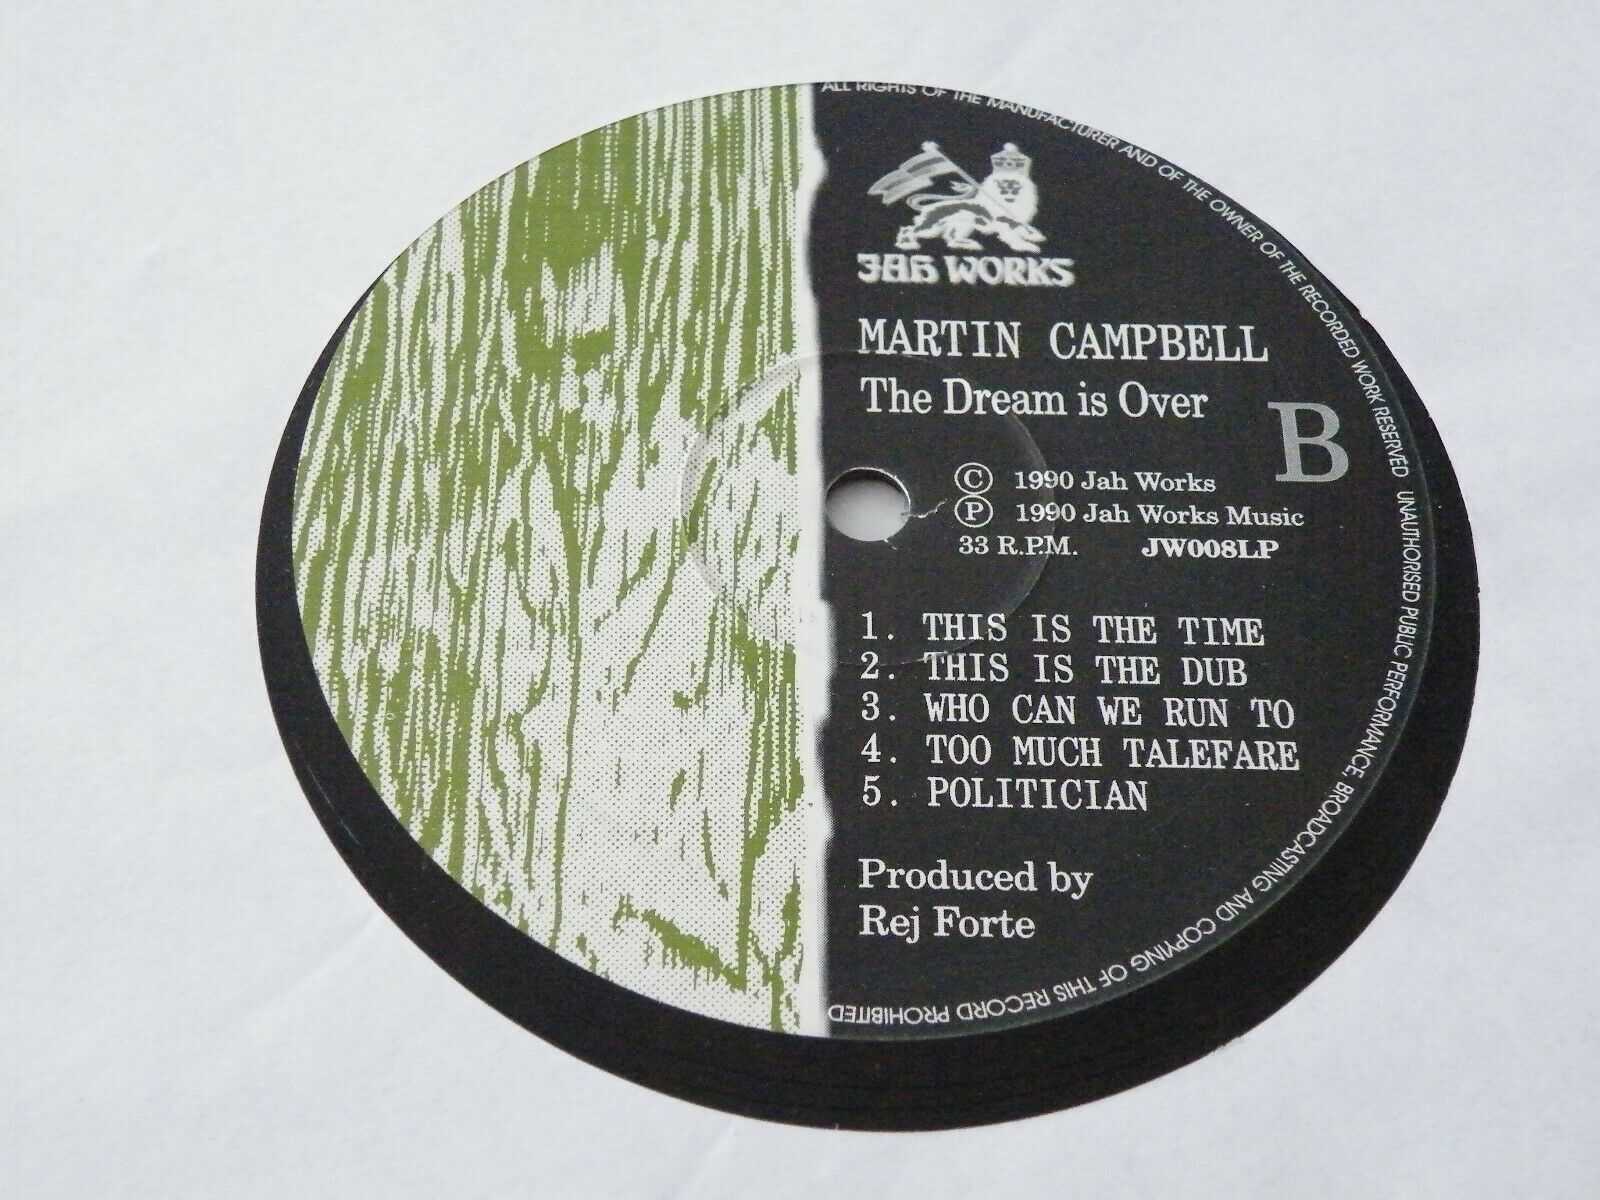 popsike.com - MARTIN CAMPBELL 'THE DREAM IS OVER' LP UK JAH WORKS 